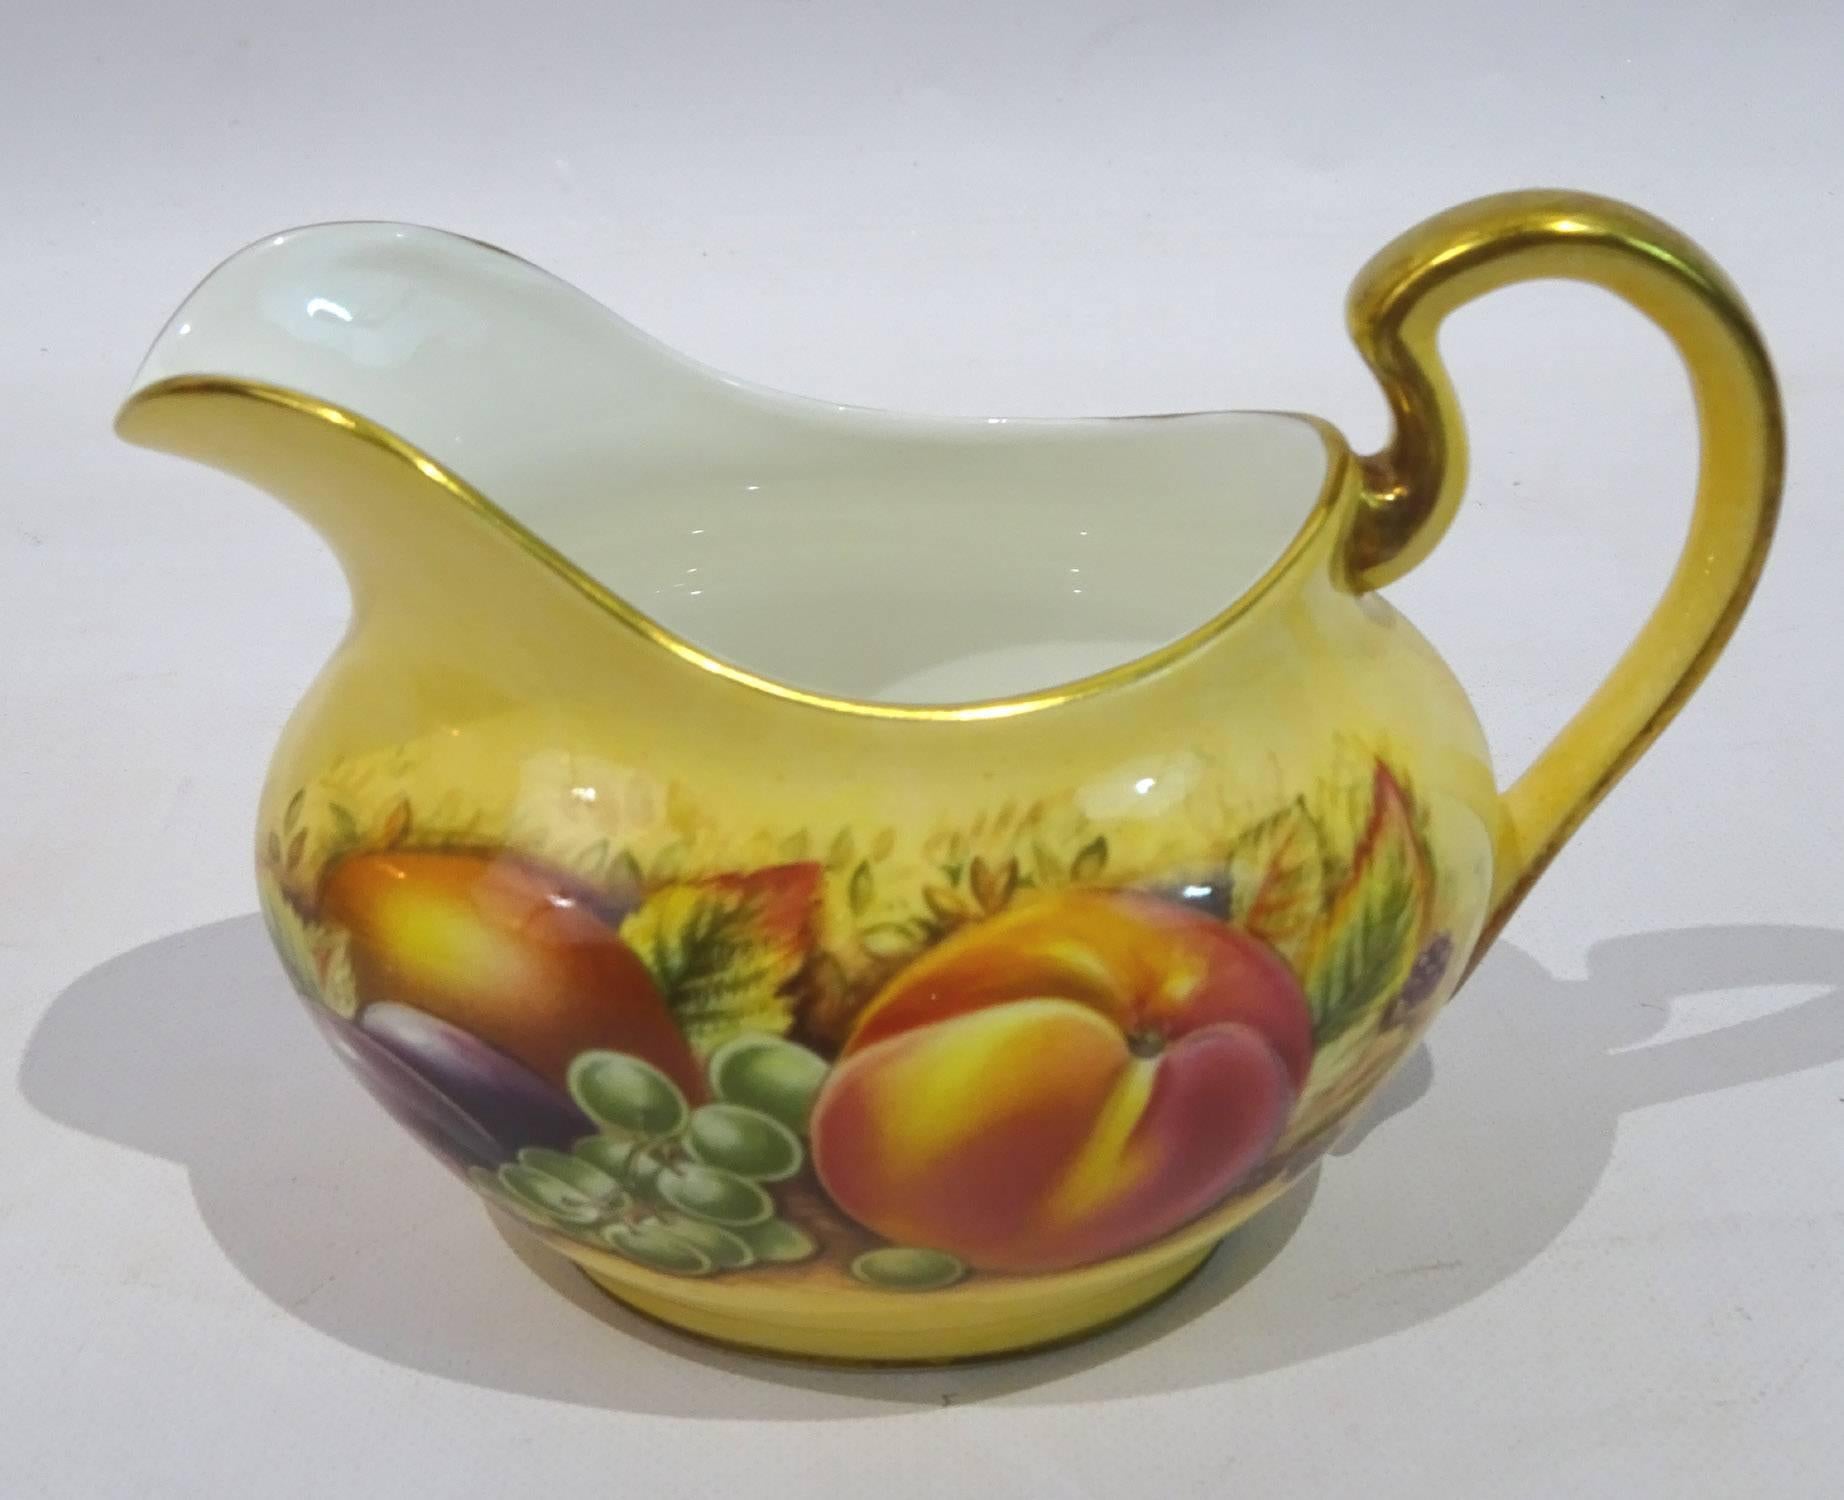 20th Century Orchard Gold China Tea/Dessert Service by John Aynsley In Excellent Condition For Sale In Dallas, TX